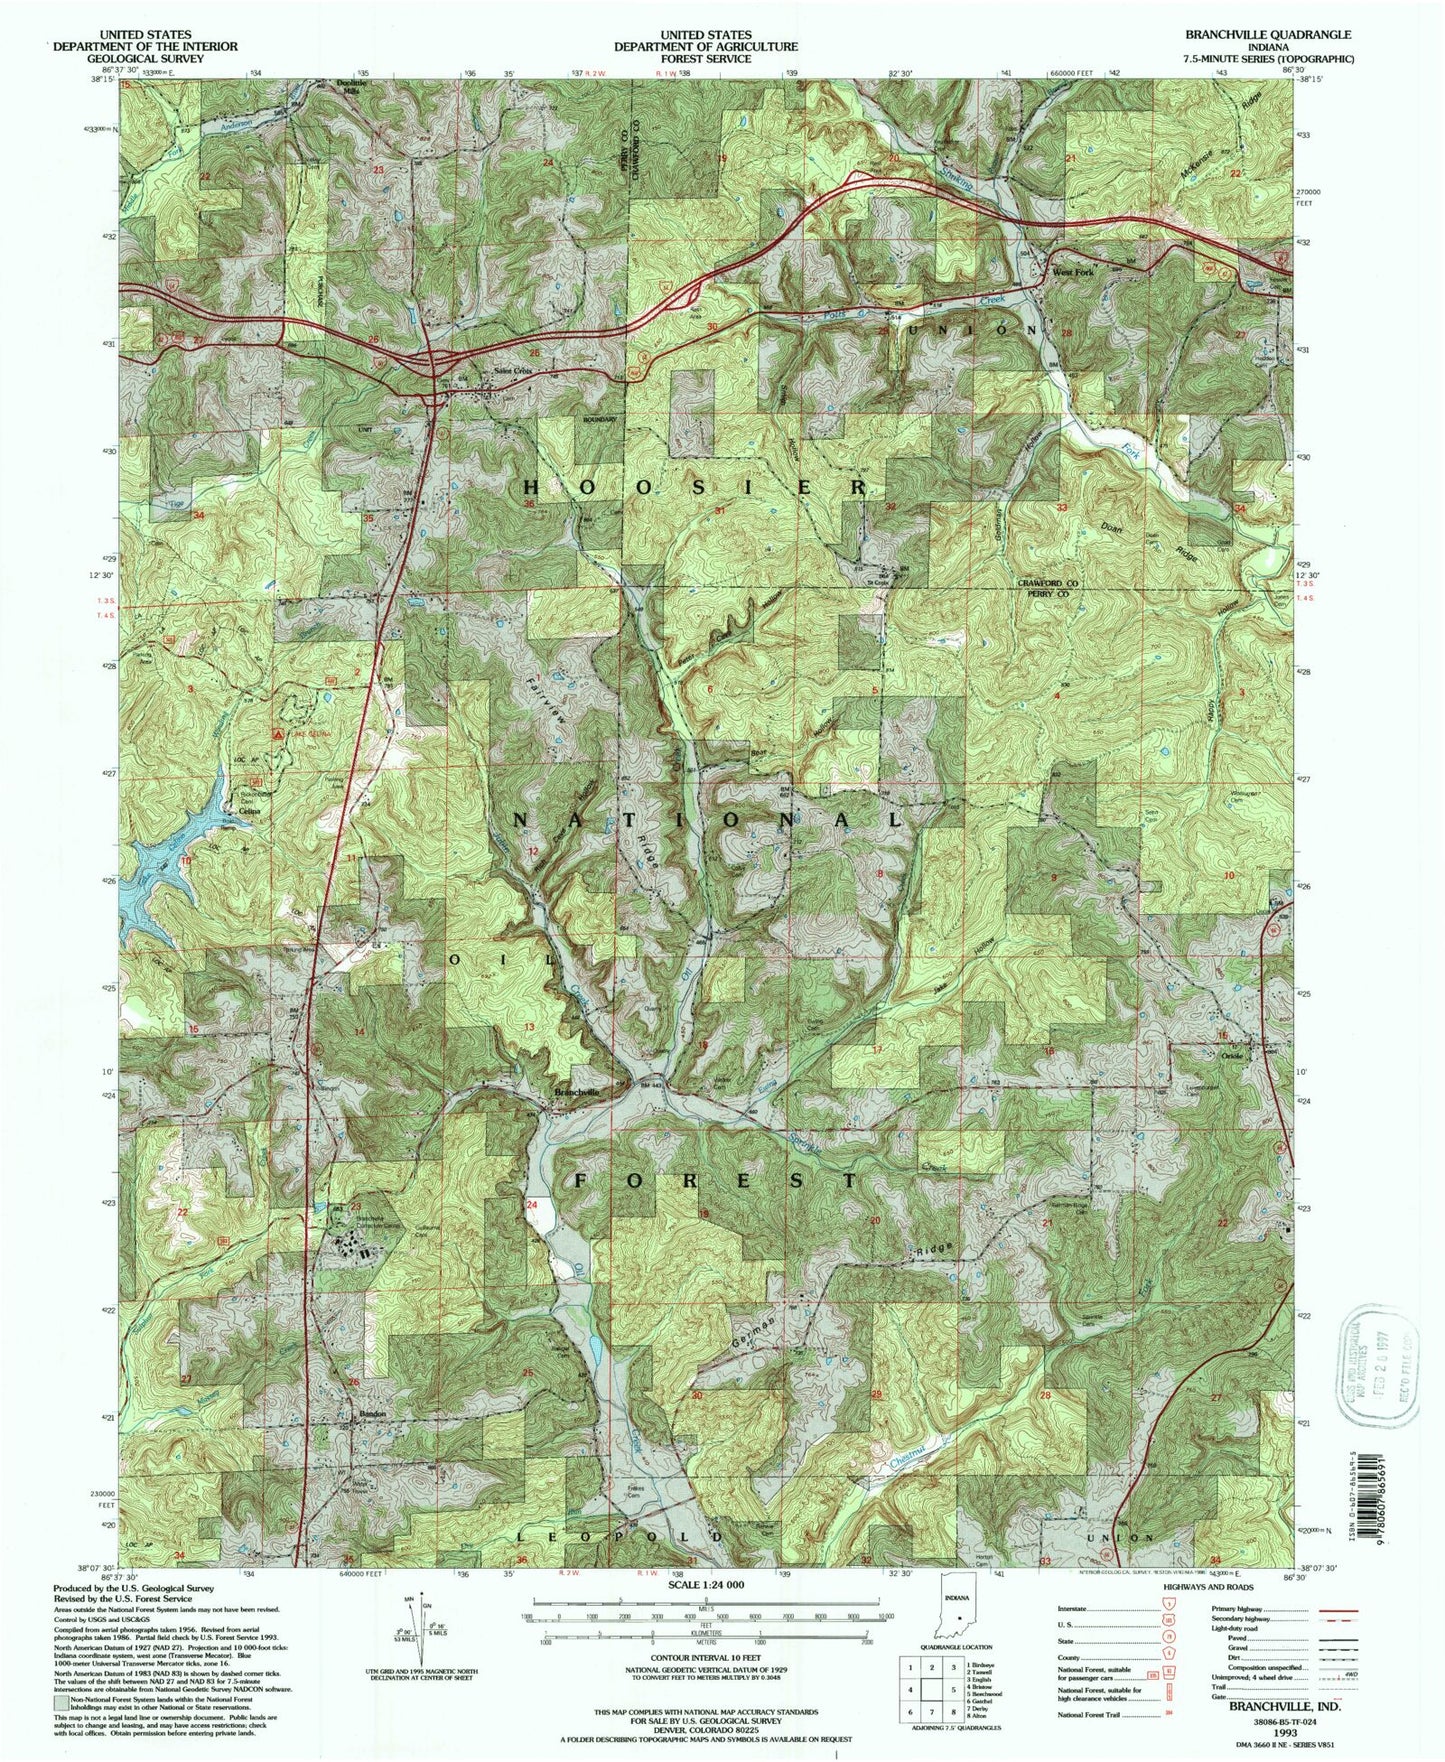 Classic USGS Branchville Indiana 7.5'x7.5' Topo Map Image